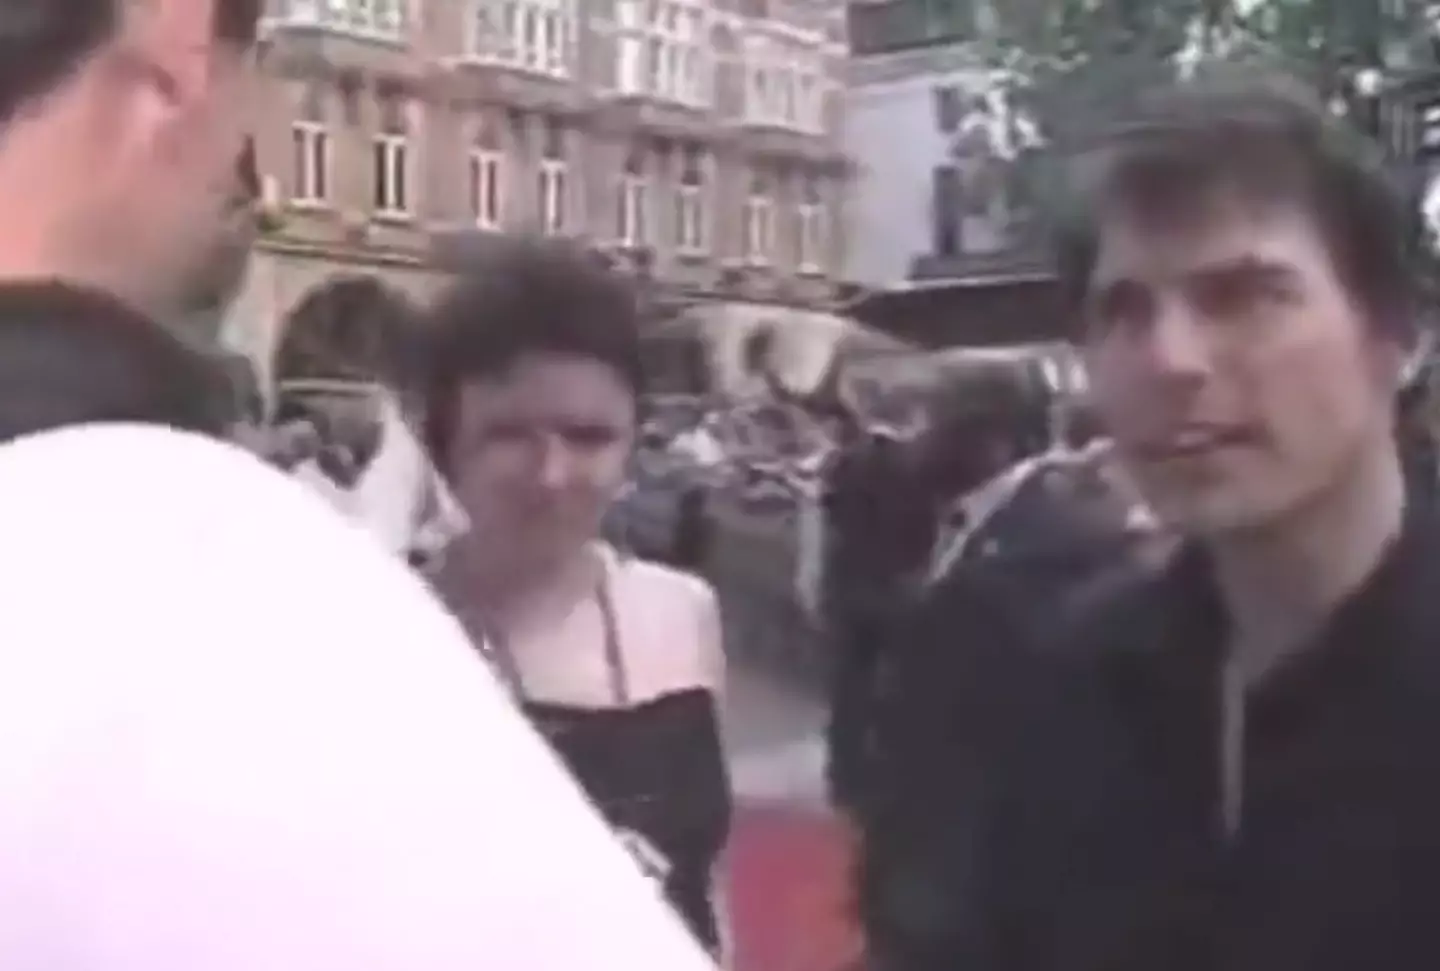 Tom Cruise calmly told off the prankster while on the red carpet.